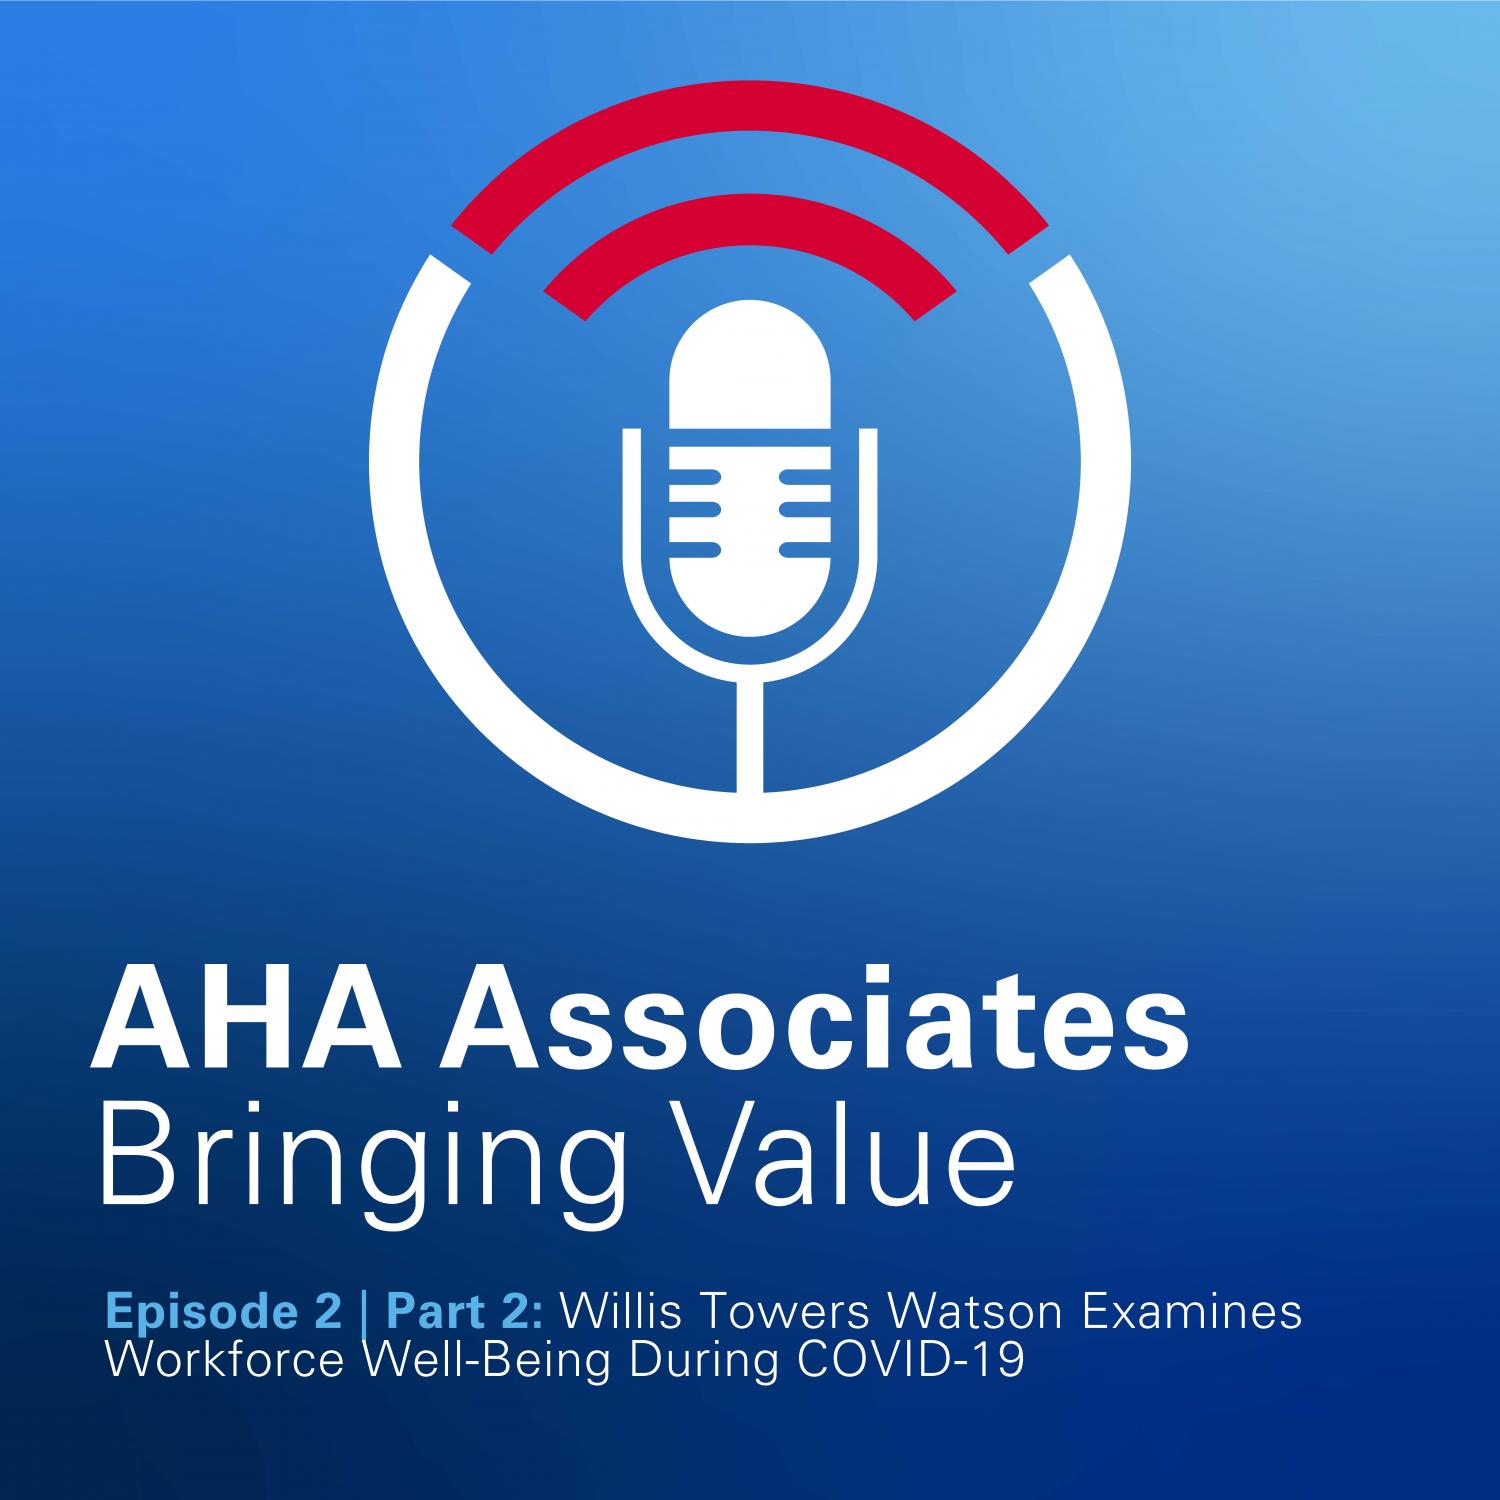 AHA Associates Bringing Value Podcast Episode 2 Part 2 Willis Tower Watson Examines workforce well-being during COVID-19